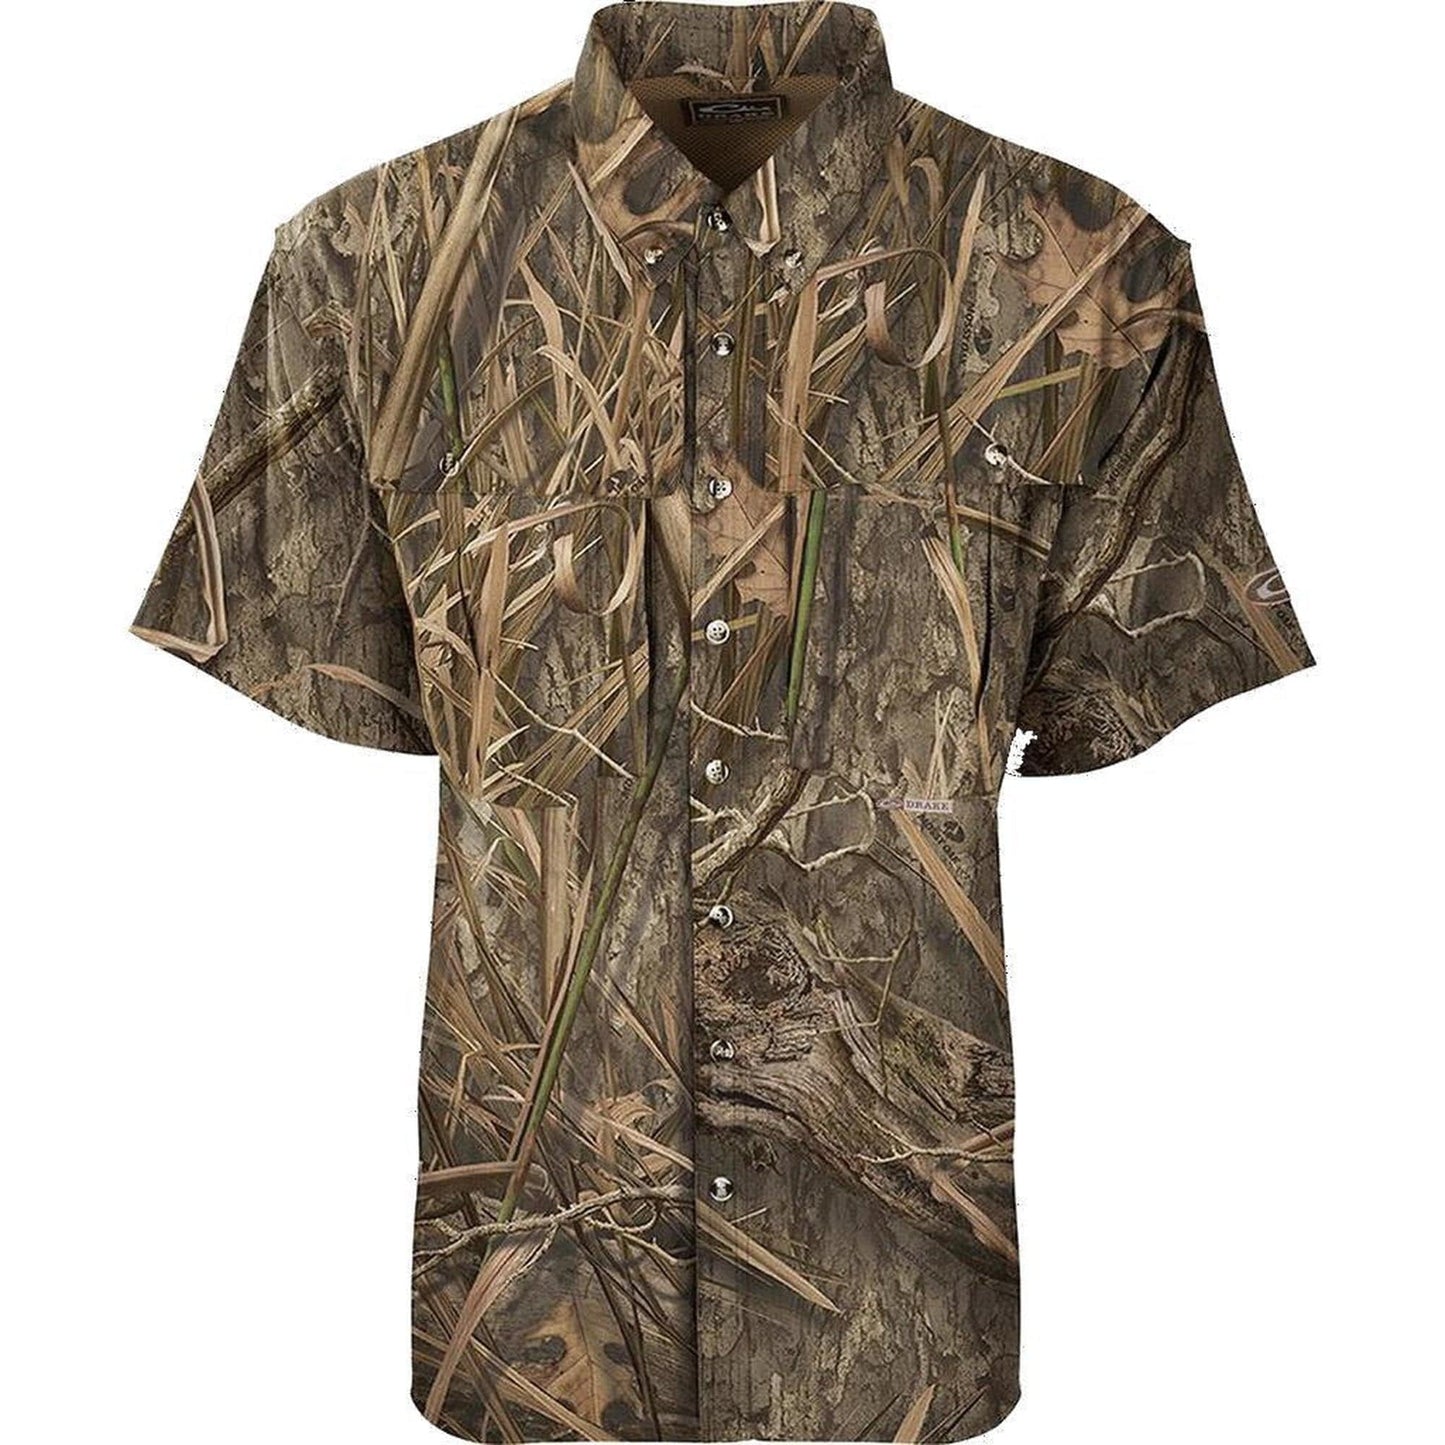 Drake Vented Wing Shooters Shirt Short Sleeve Camo by Texas Fowlers